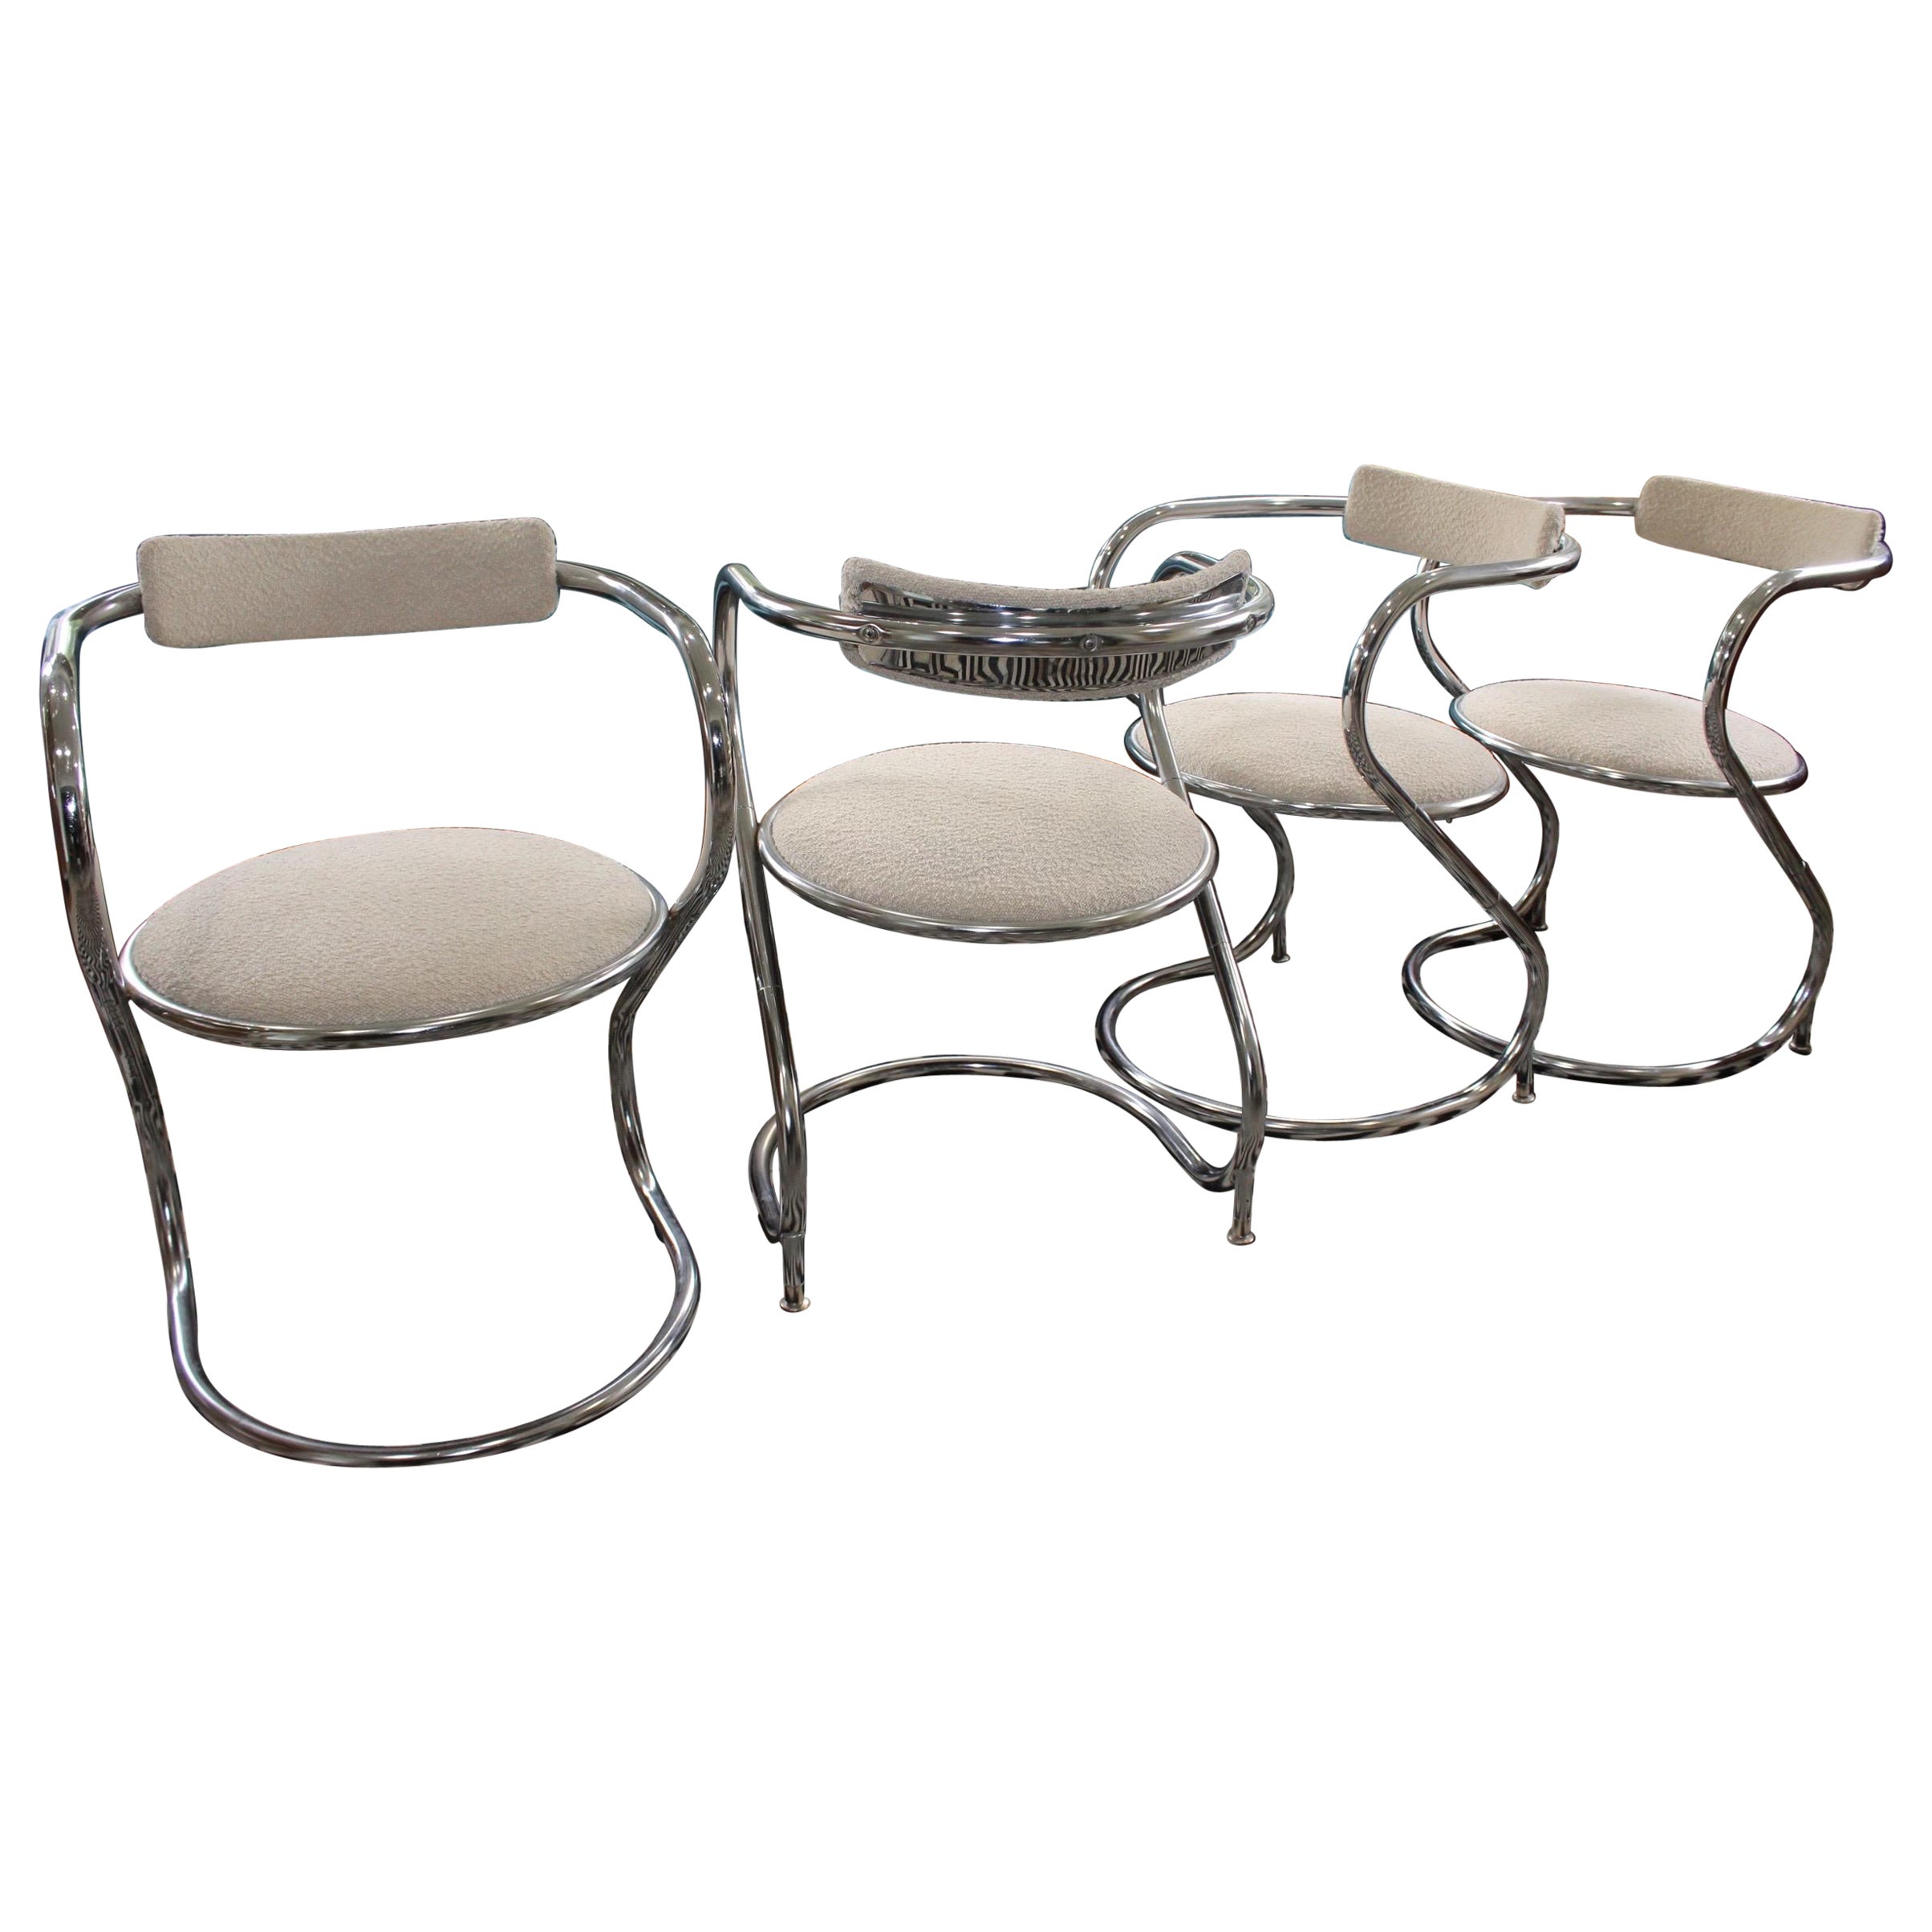 Set of 4 Midcentury Modern Chrome and Boucle Reverse Cantilever Chairs